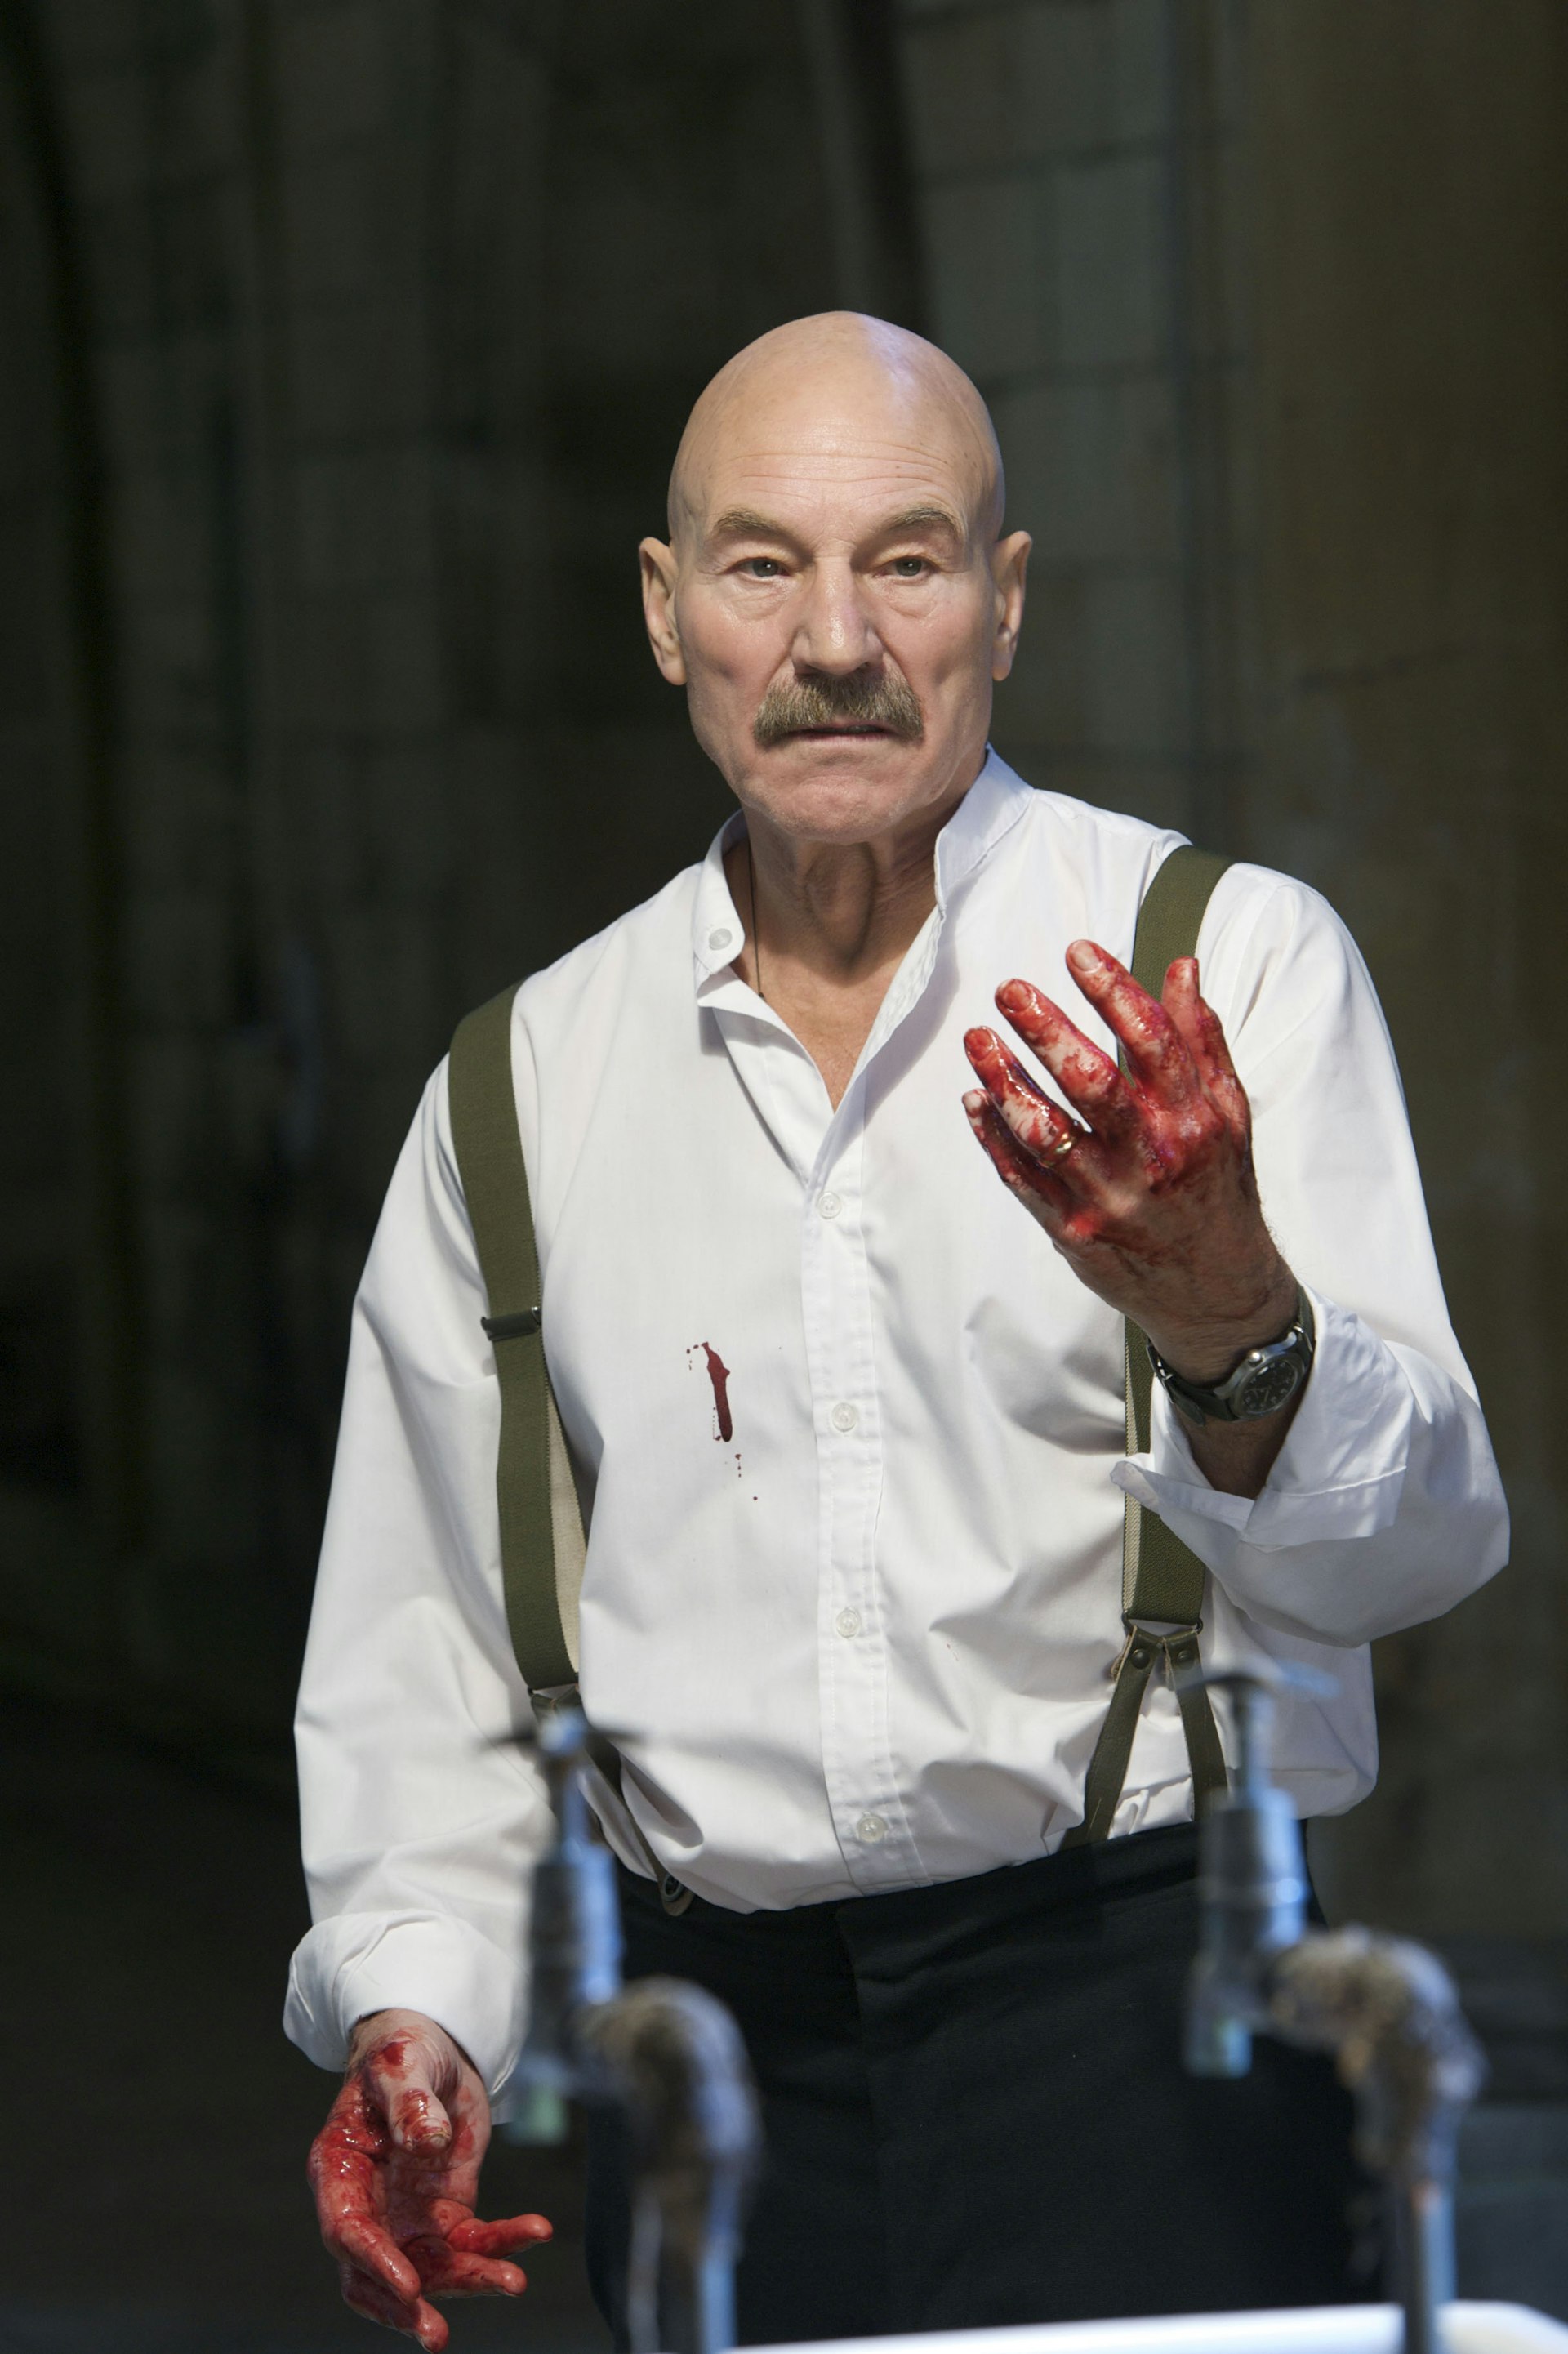 A bald man with a moustache and bloody hands